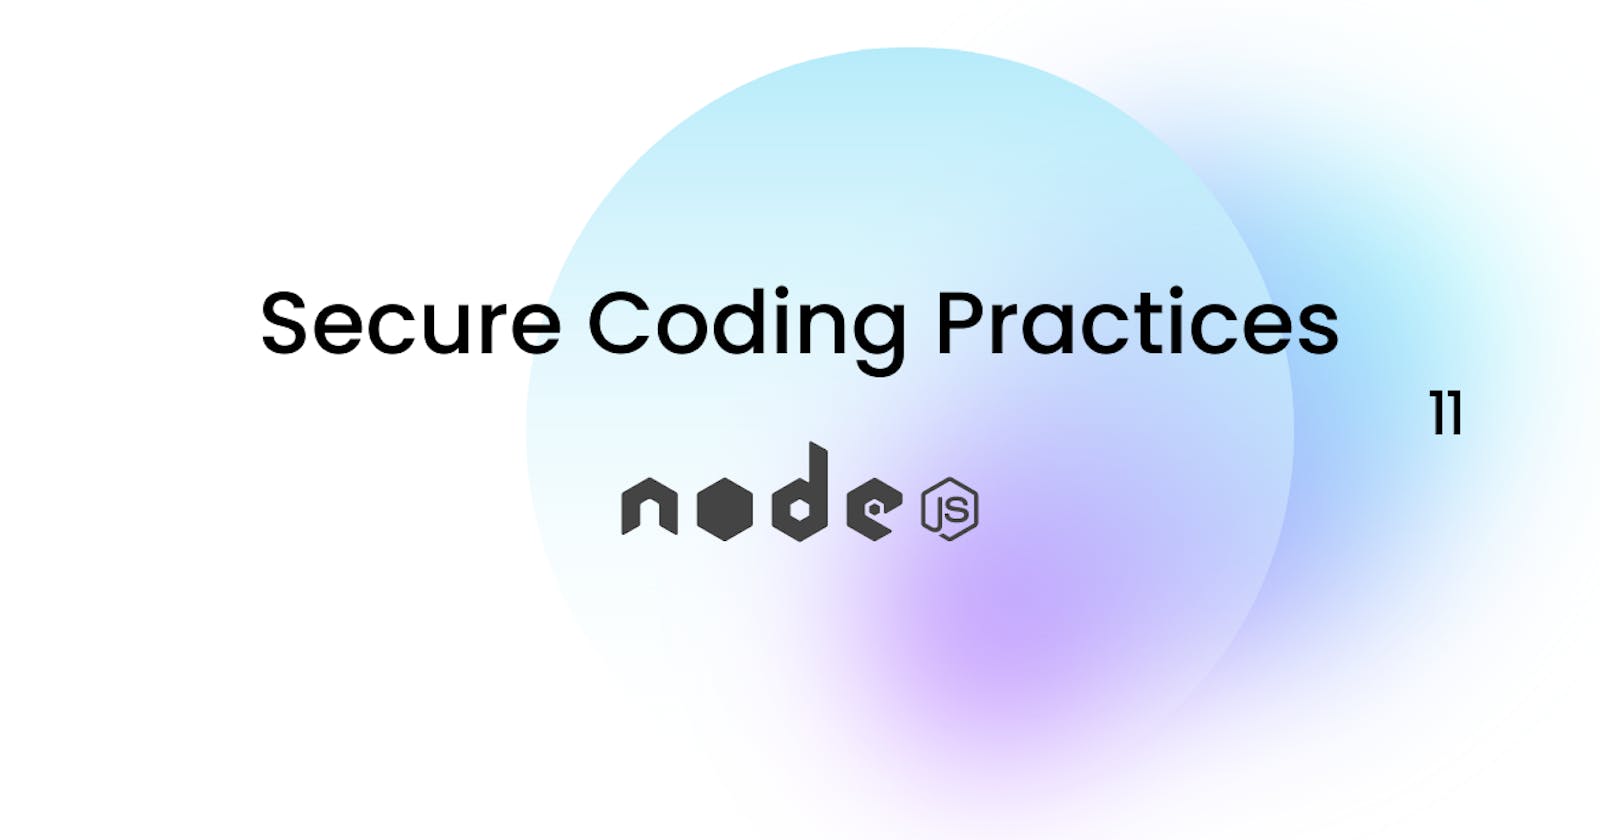 Secure coding practices with Nodejs